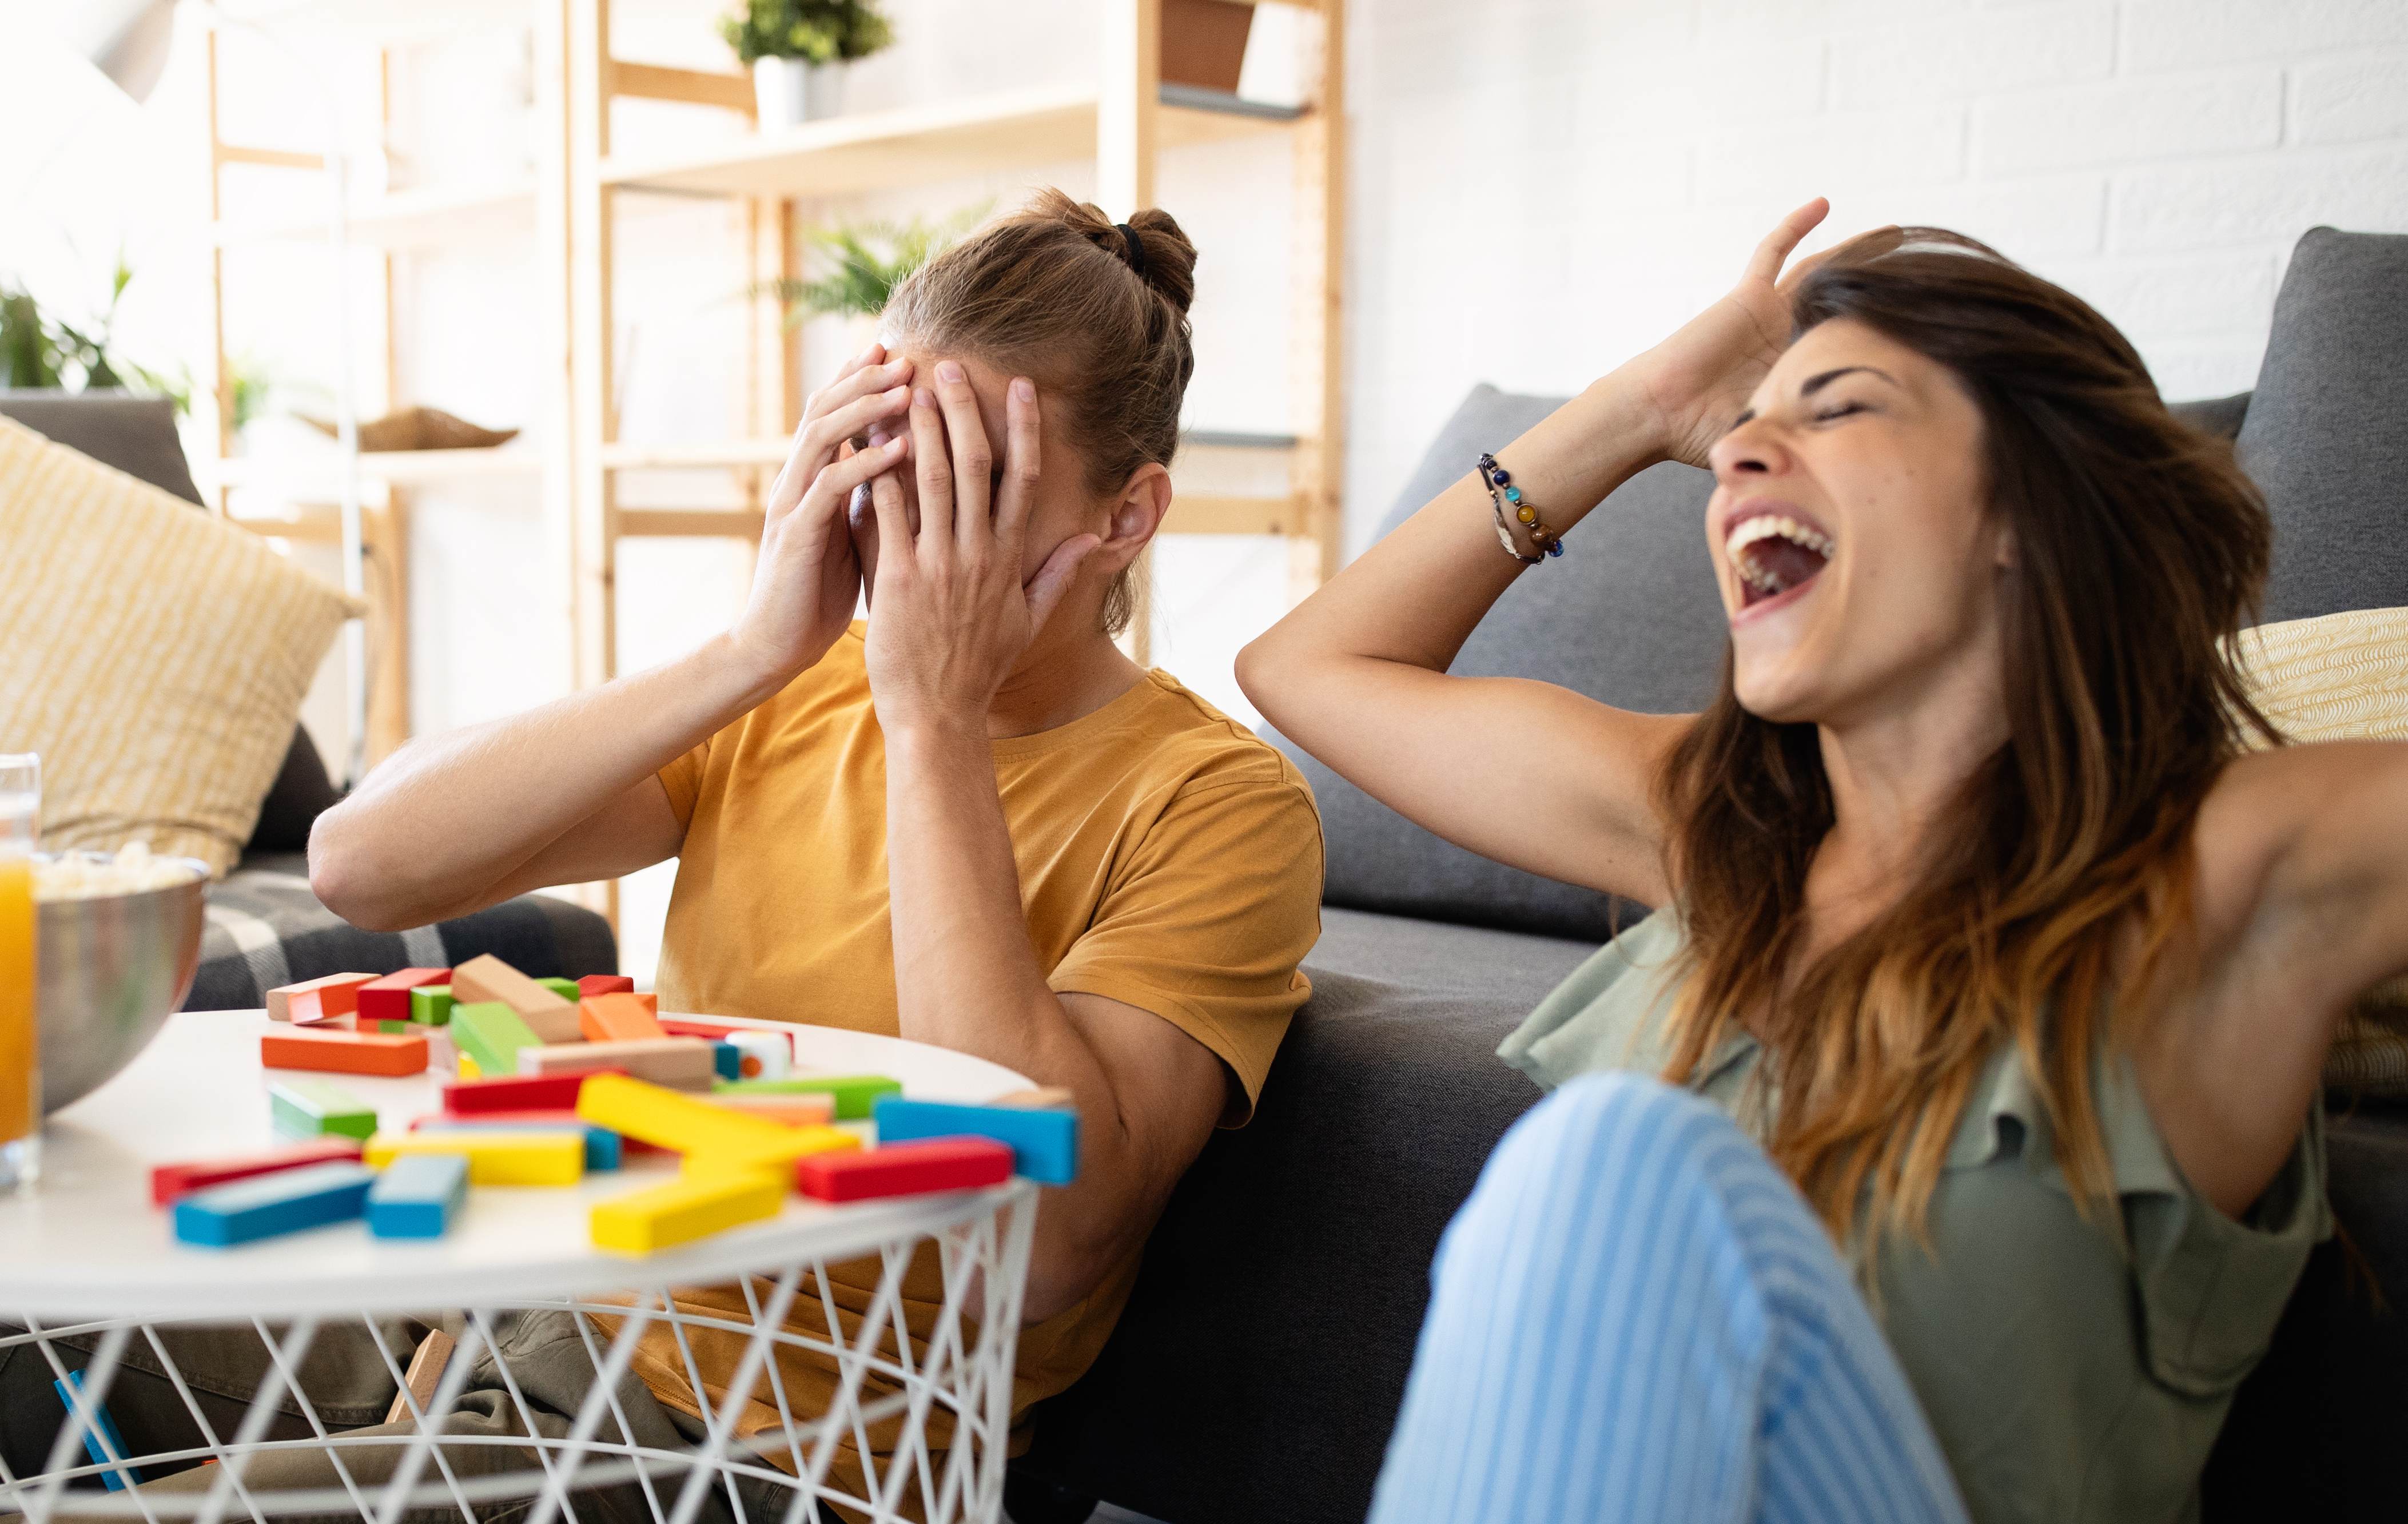 An elated woman wins at game night against her boyfriend. 